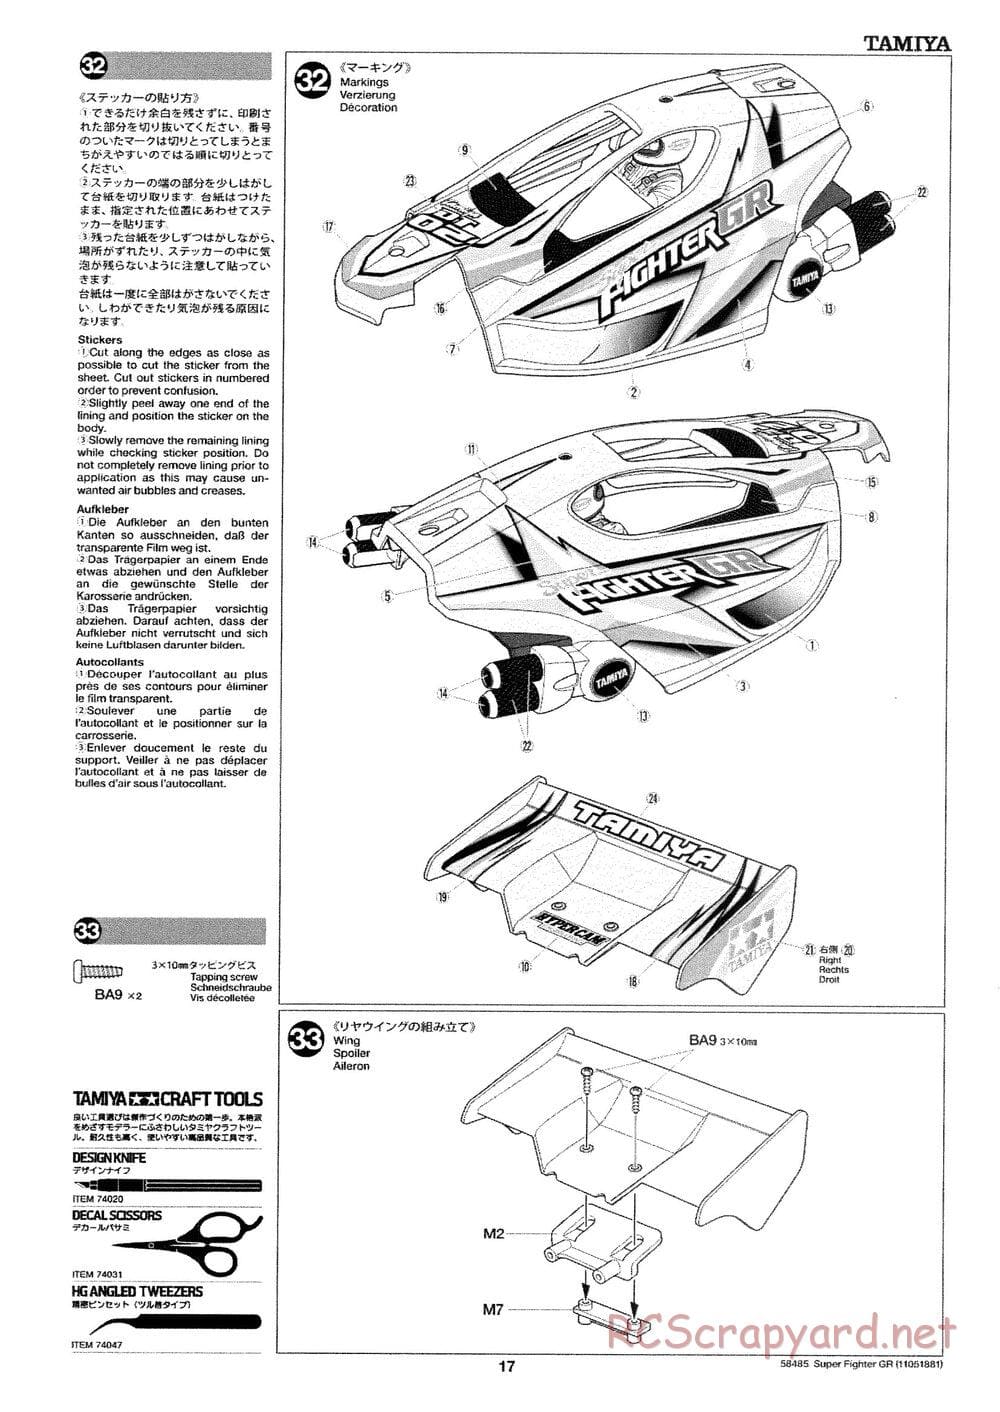 Tamiya - Super Fighter GR - DT-02 Chassis - Manual - Page 17